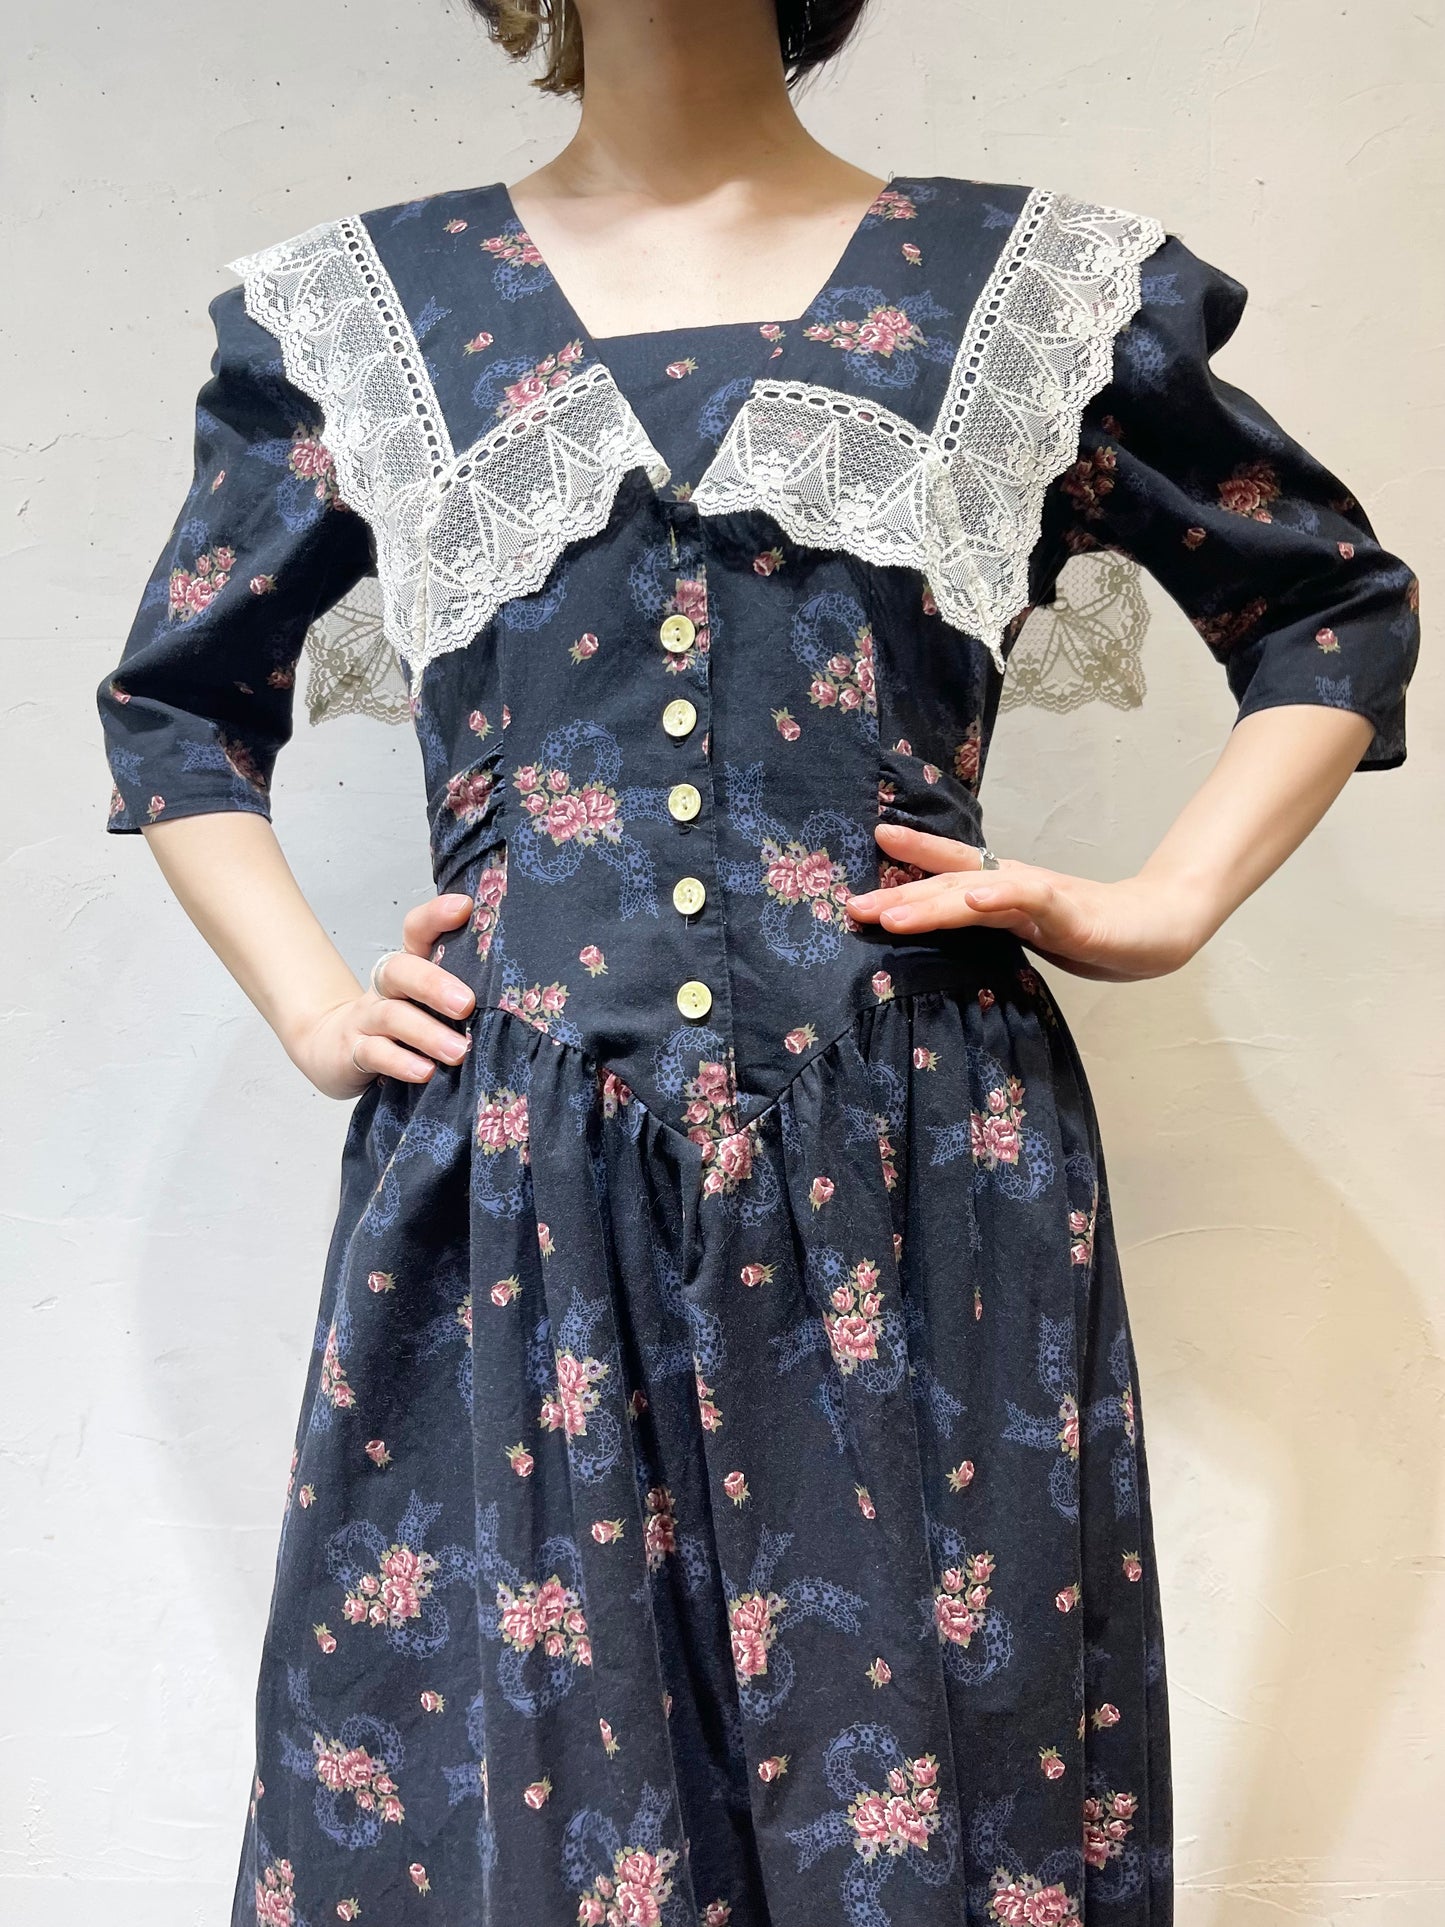 Vintage Flower Dress MADE IN USA [A26055]